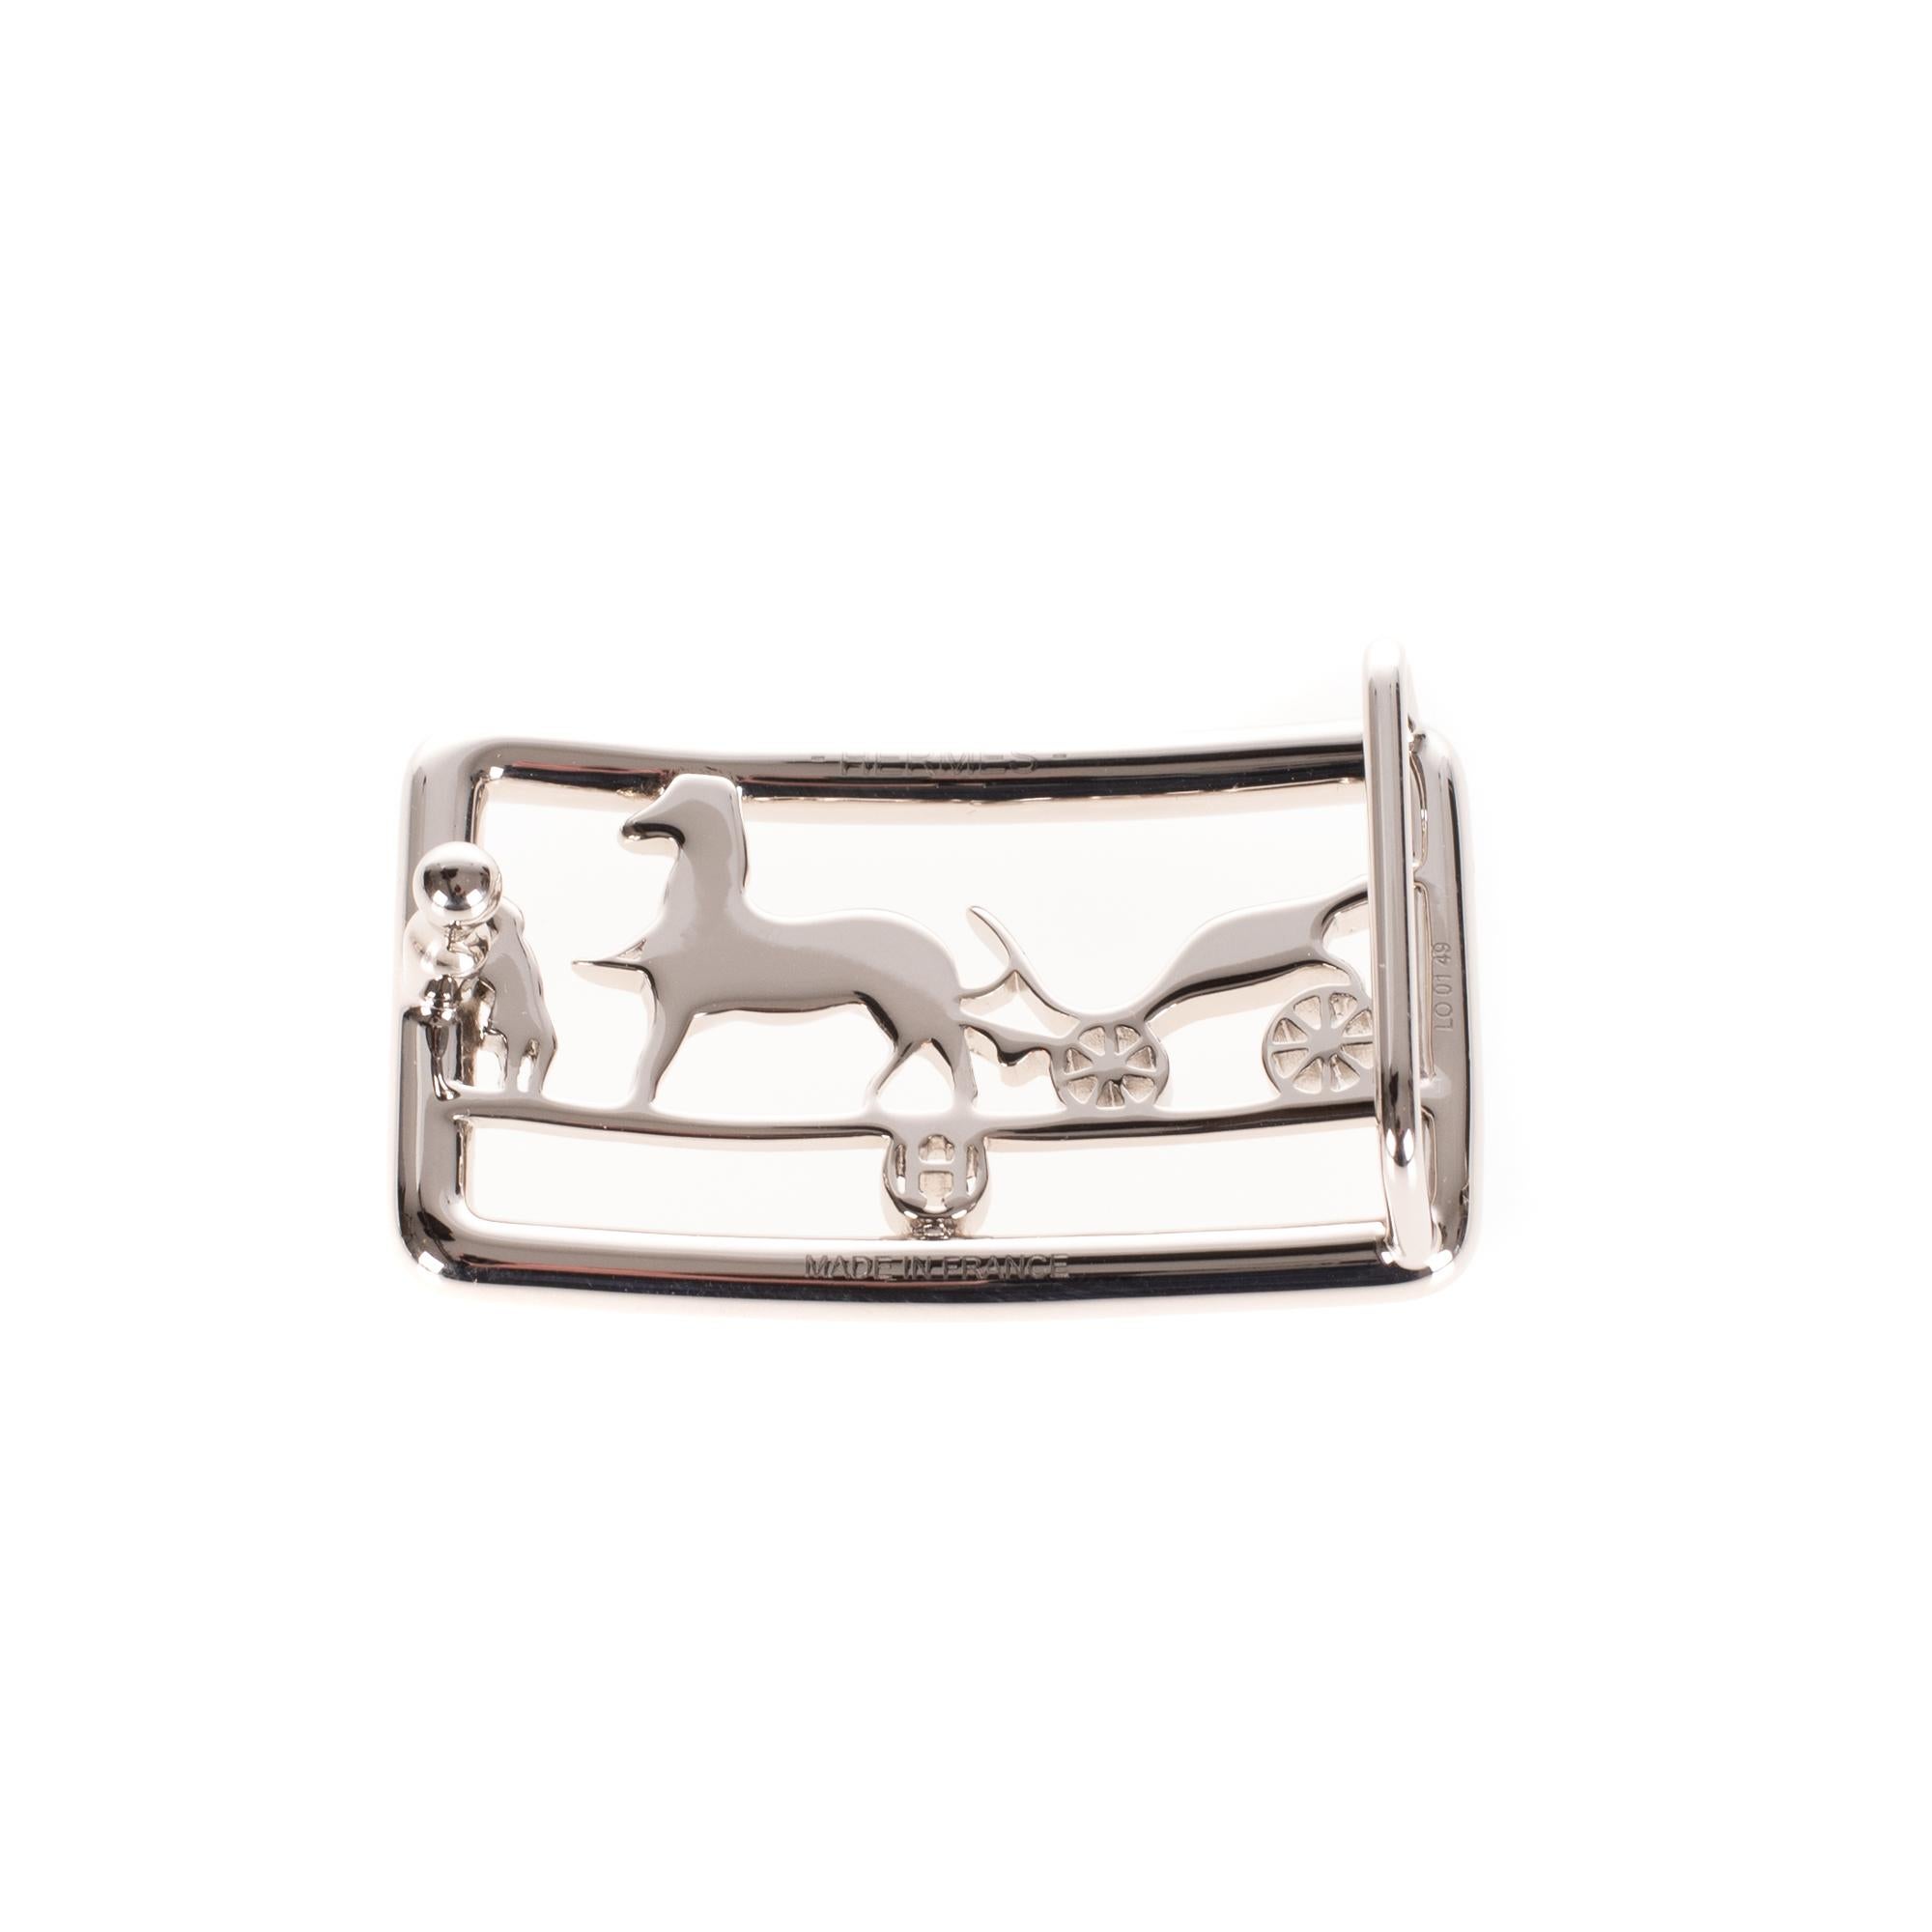 Brand new and from the new collection !

Type: Belt Buckle
Brand: Hermès
Model : Calèche
Material : Steel
Color : Shiny Silver
Signature: Hermès
For a leather of 3.2 cm 
Dimensions : H: 2,8 x L: 4,8 x P: 1.4 cm
Pristine Condition- Sold with dustbag.